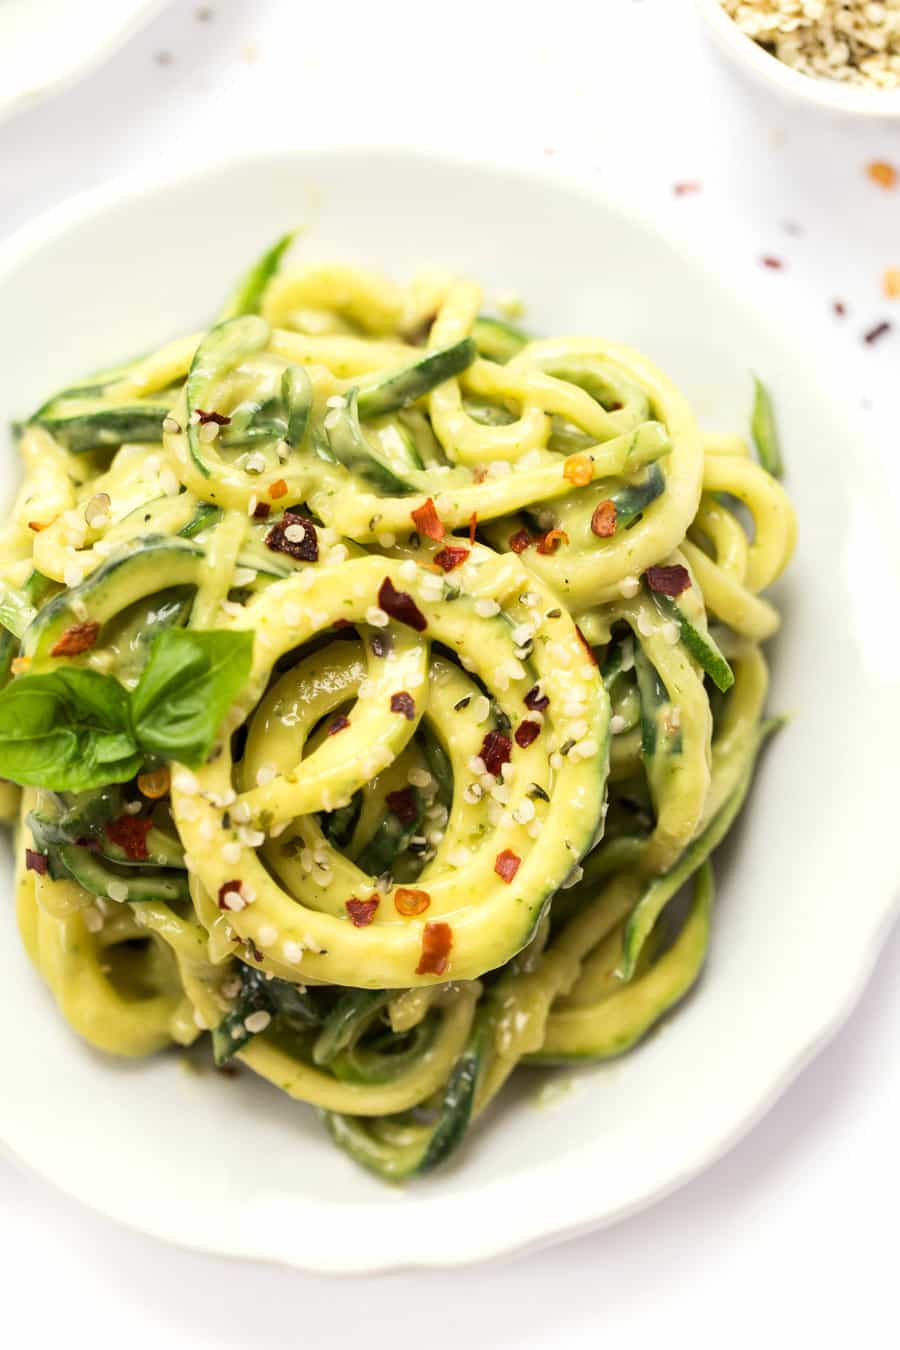 Super simple AVOCADO ALFREDO sauce to use for any pasta...including zucchini noodles!